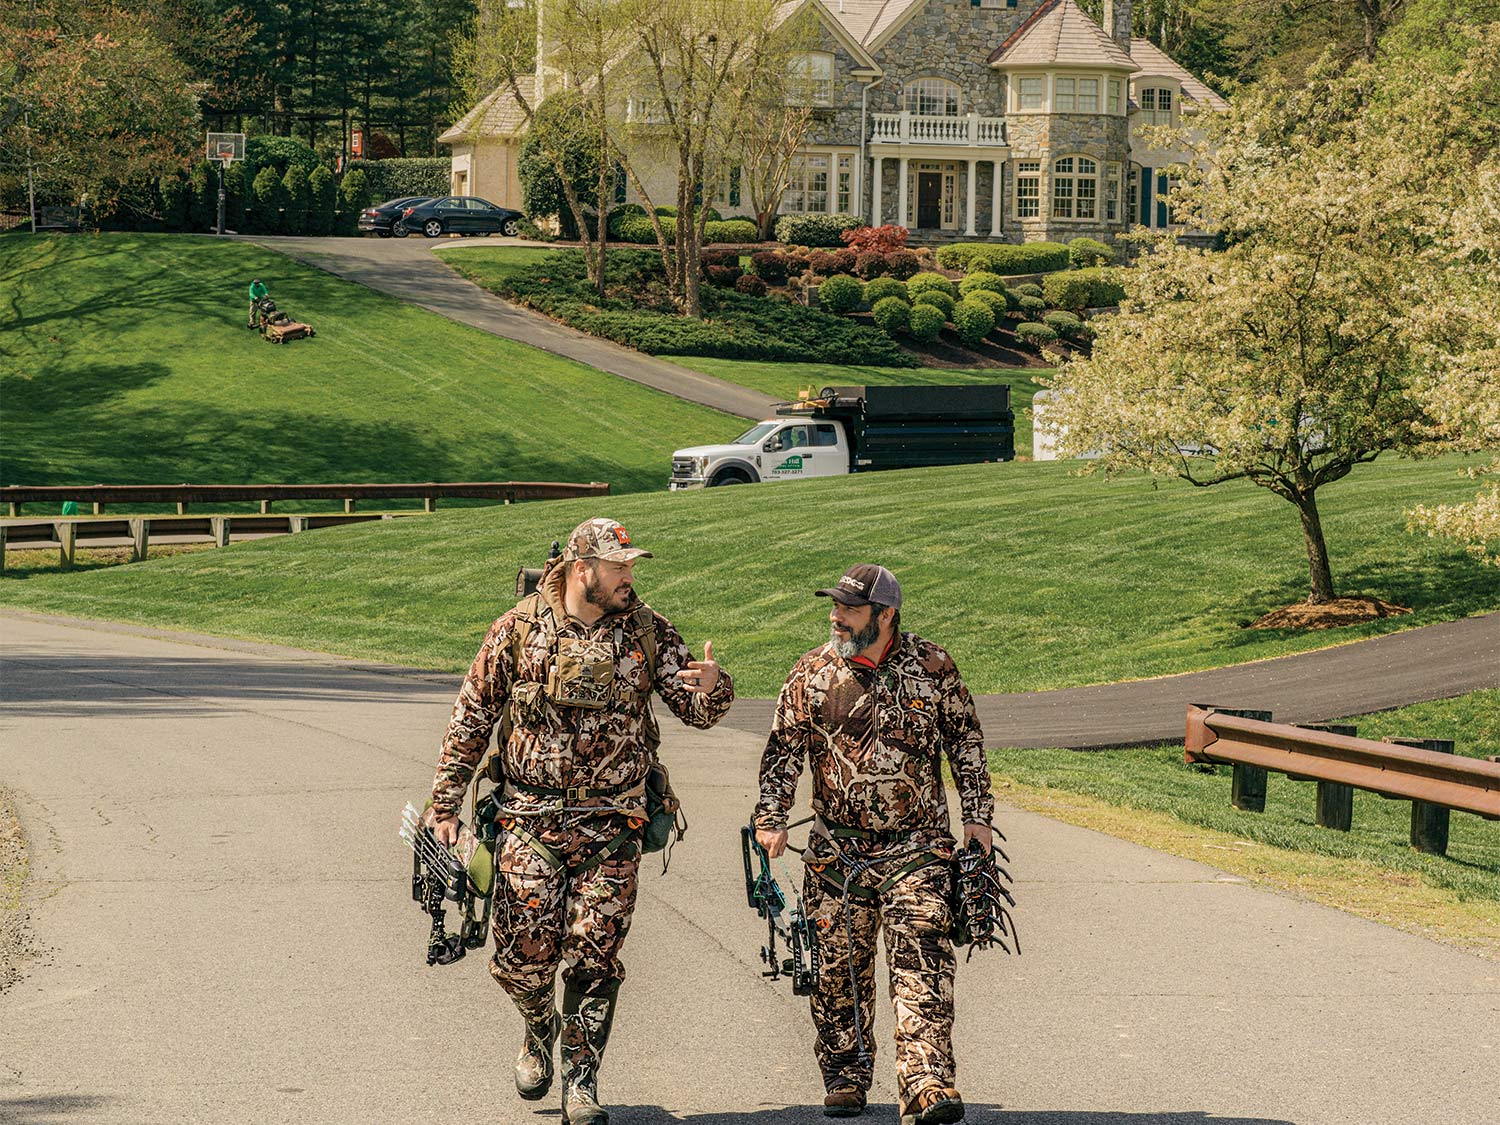 Two hunters in full camo walk down the street in the middle of Virginia suburbs.